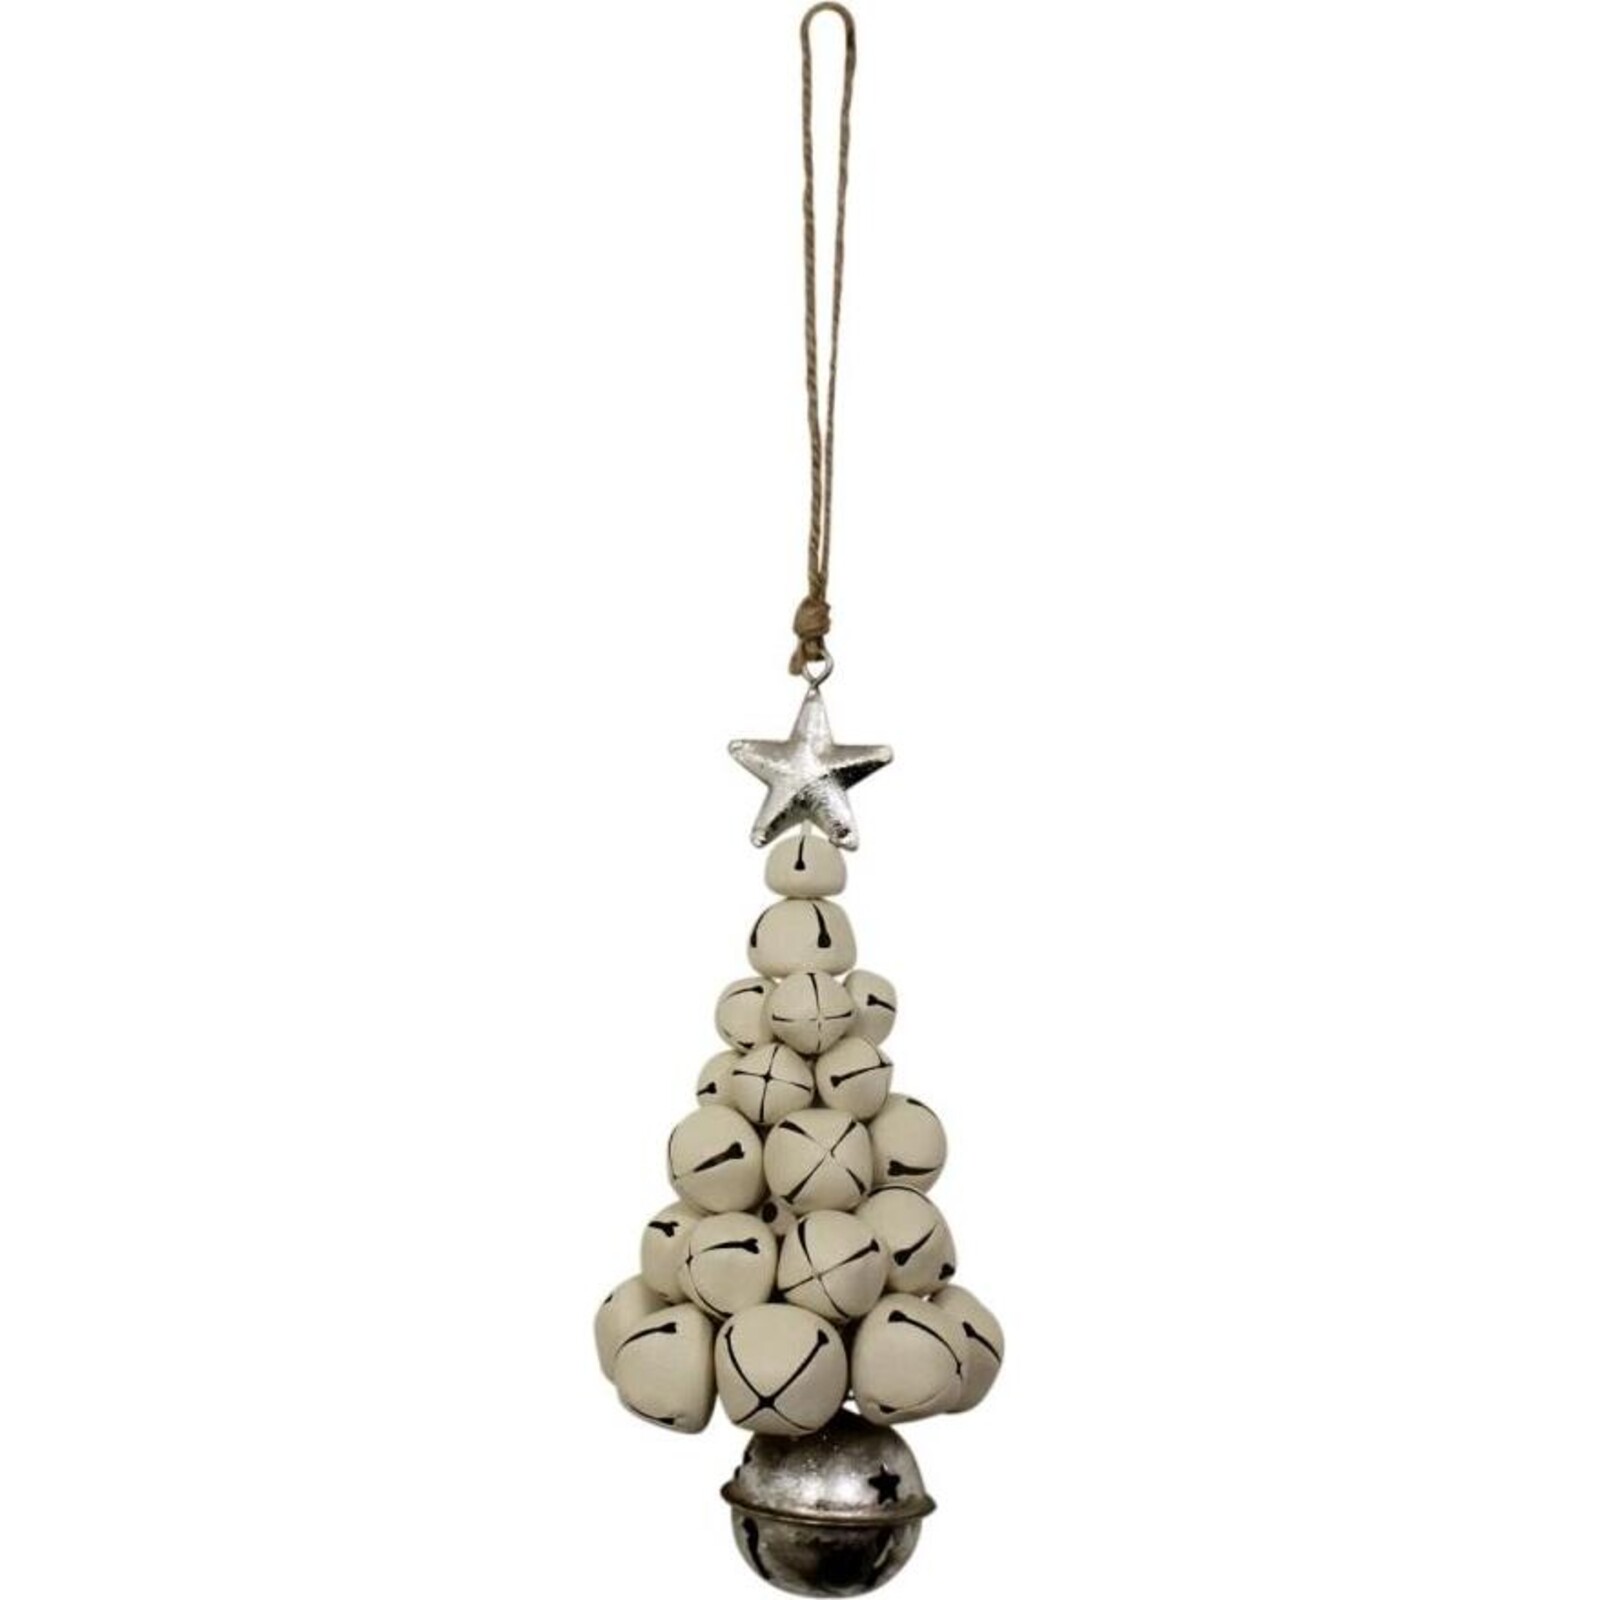 Hanging Bell Silver Xmas Tree
Silver